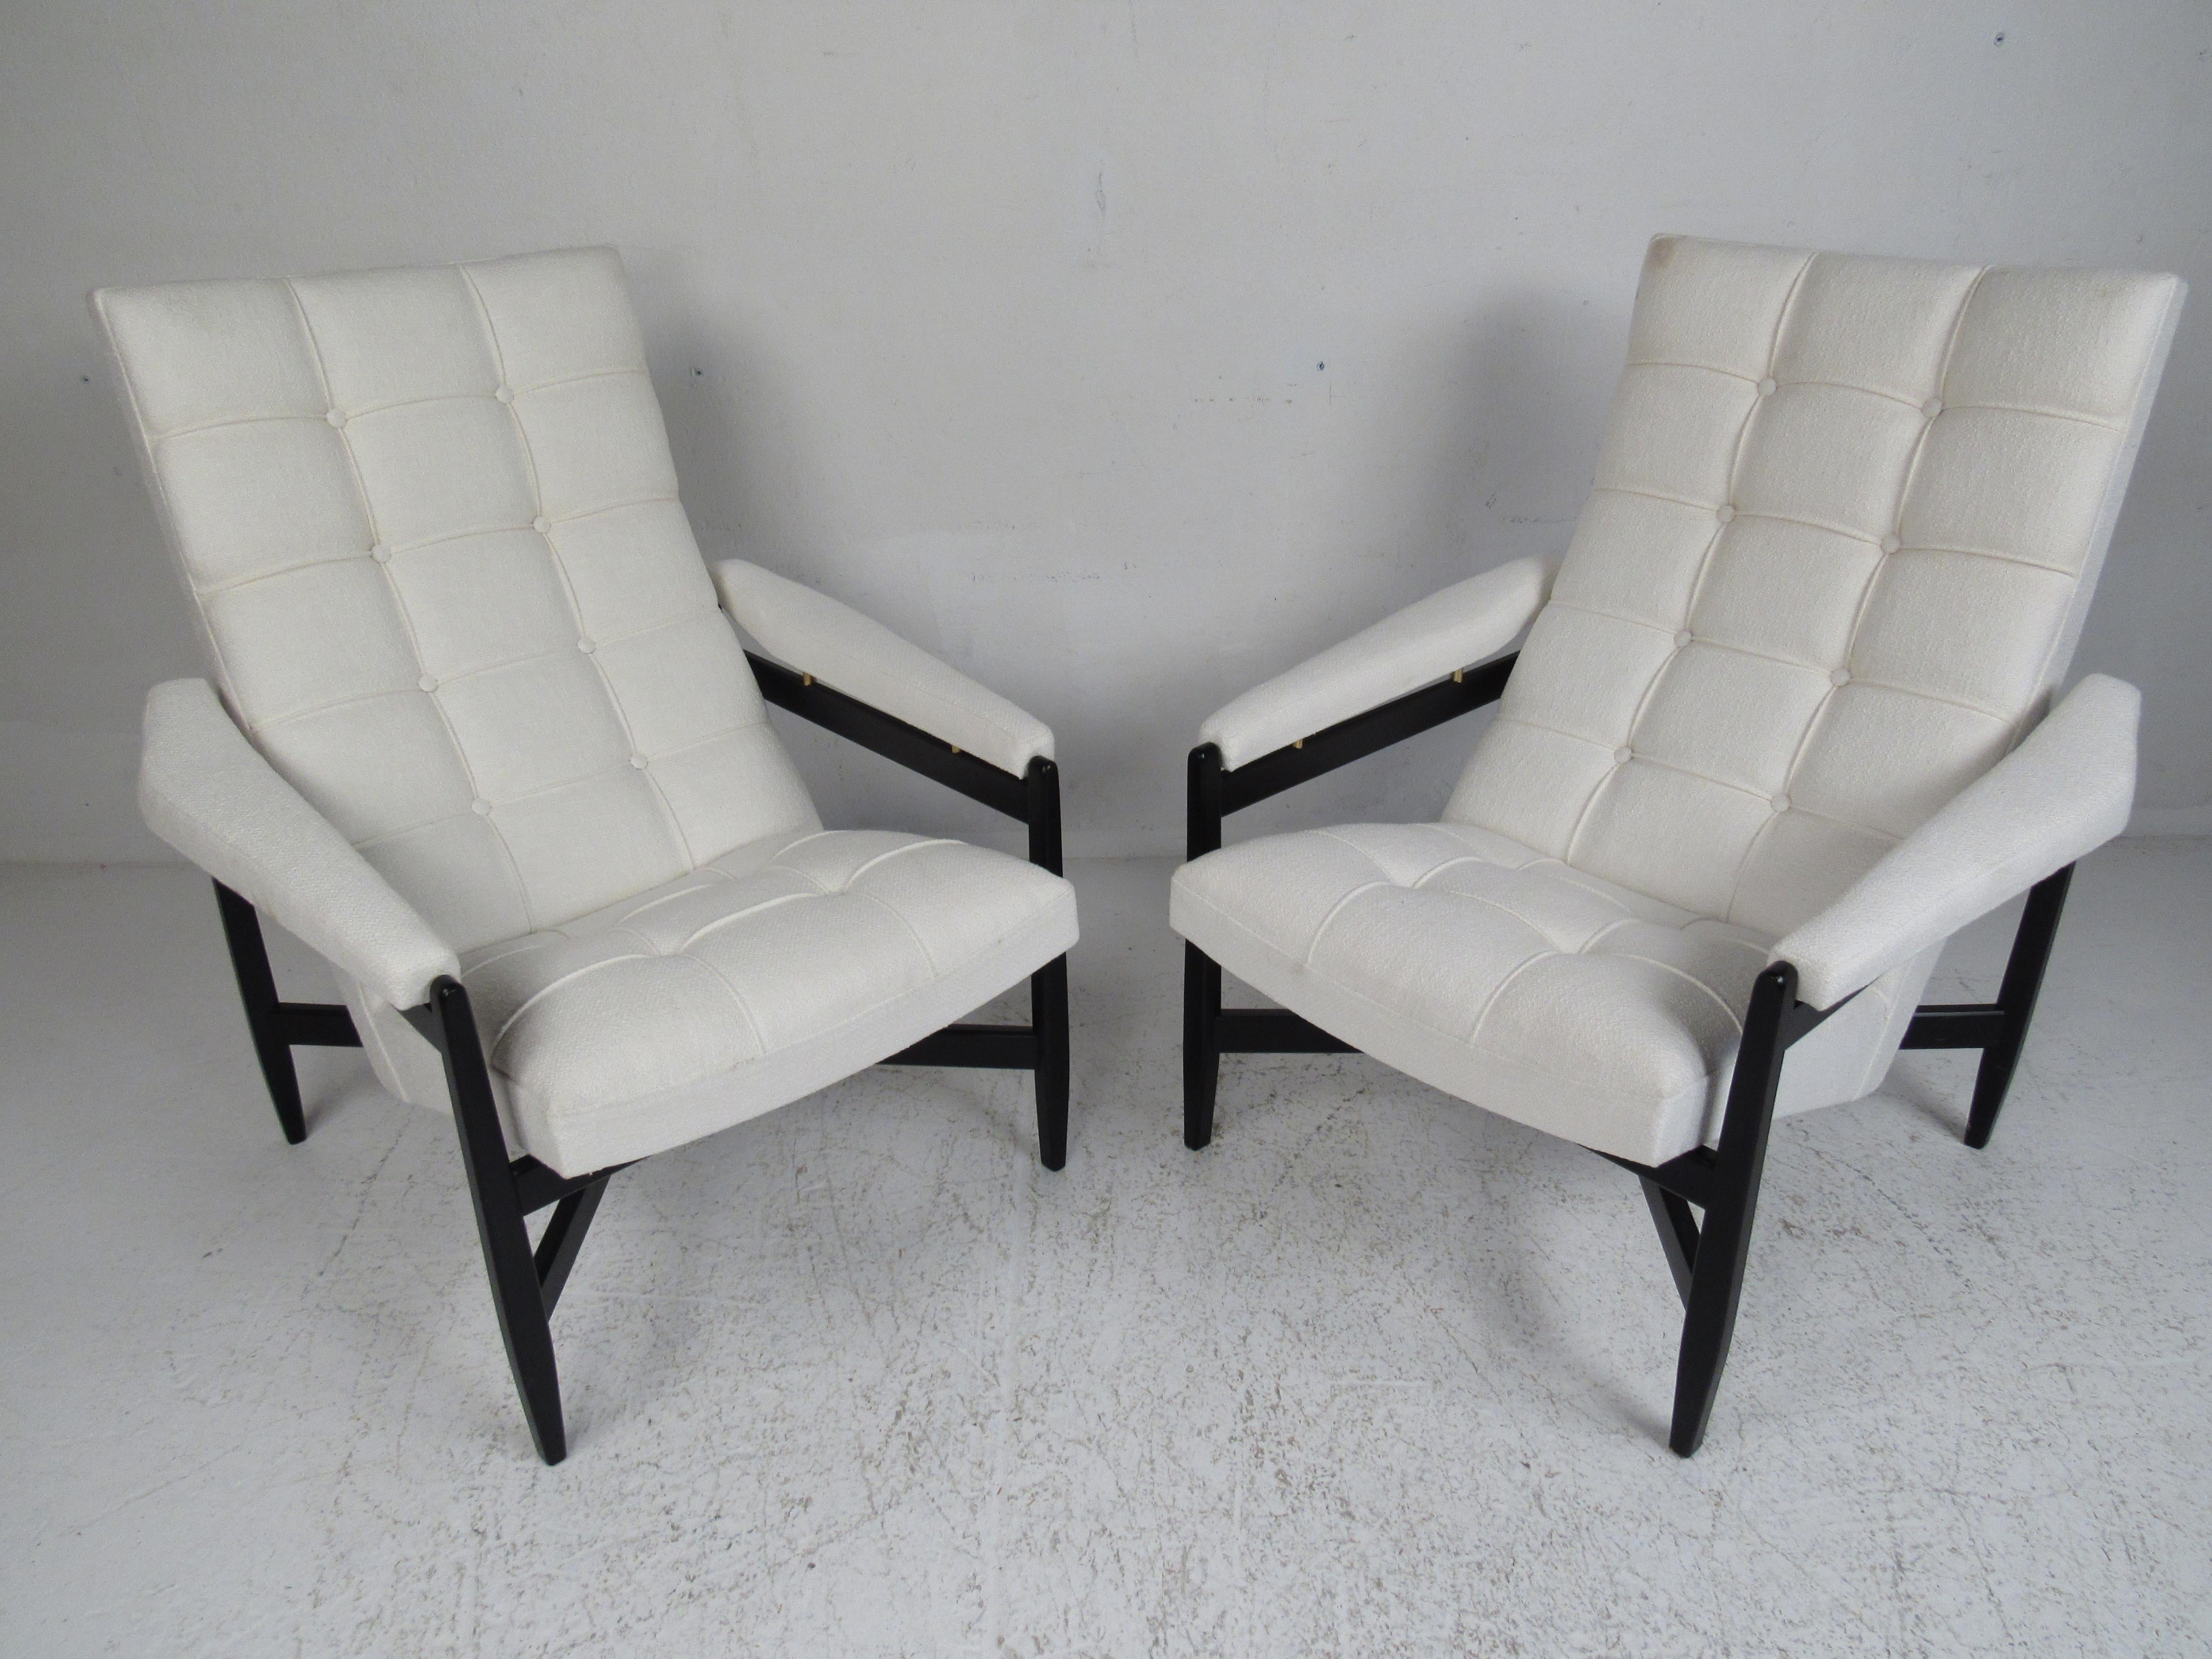 This beautiful pair of vintage modern Italian lounge chairs feature black painted frames with 